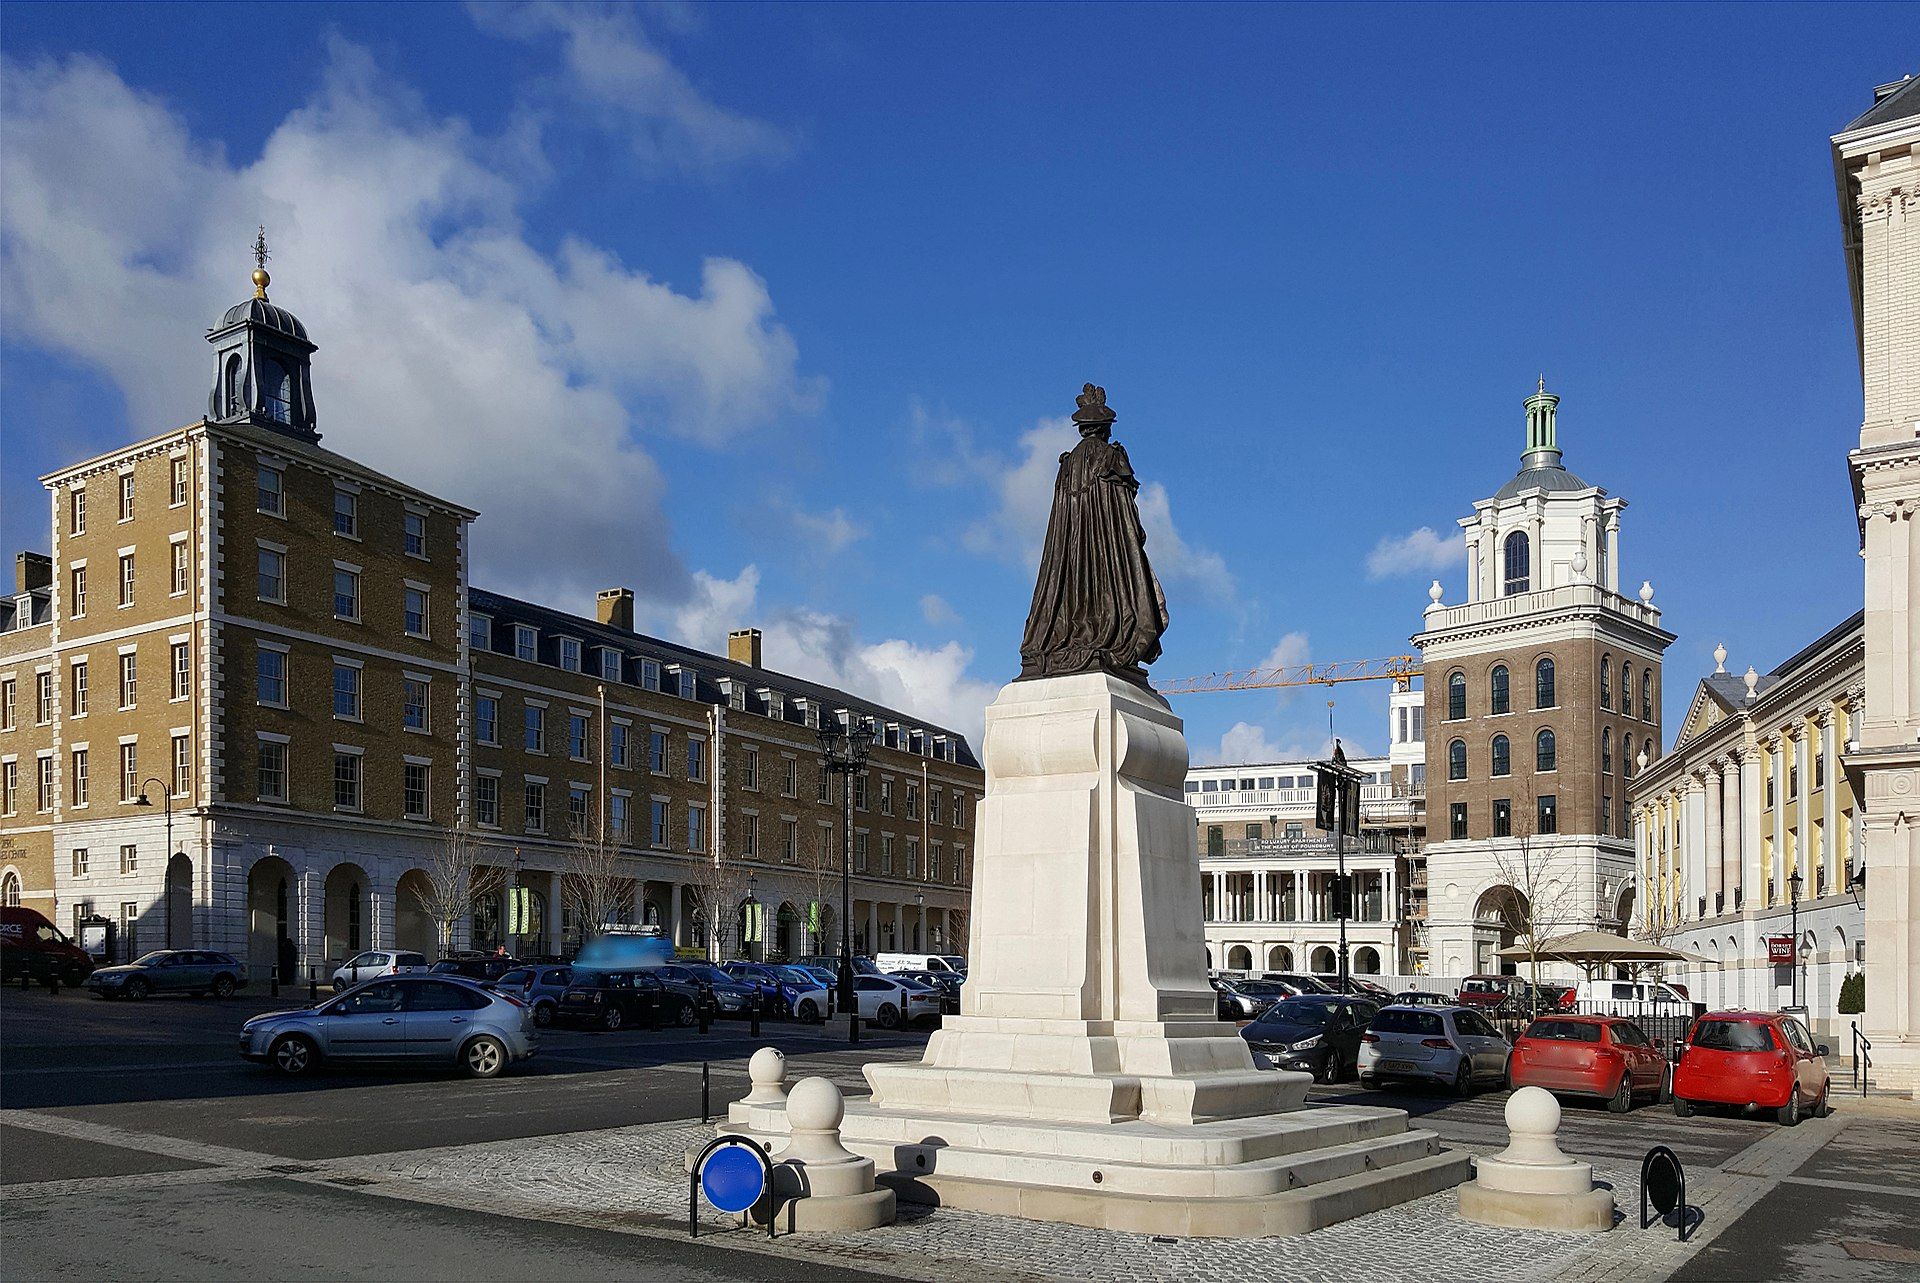 The Main Square of Poundbury, a settlement on the outskirts of Dorchester built with keen endorsement from Prince Charles